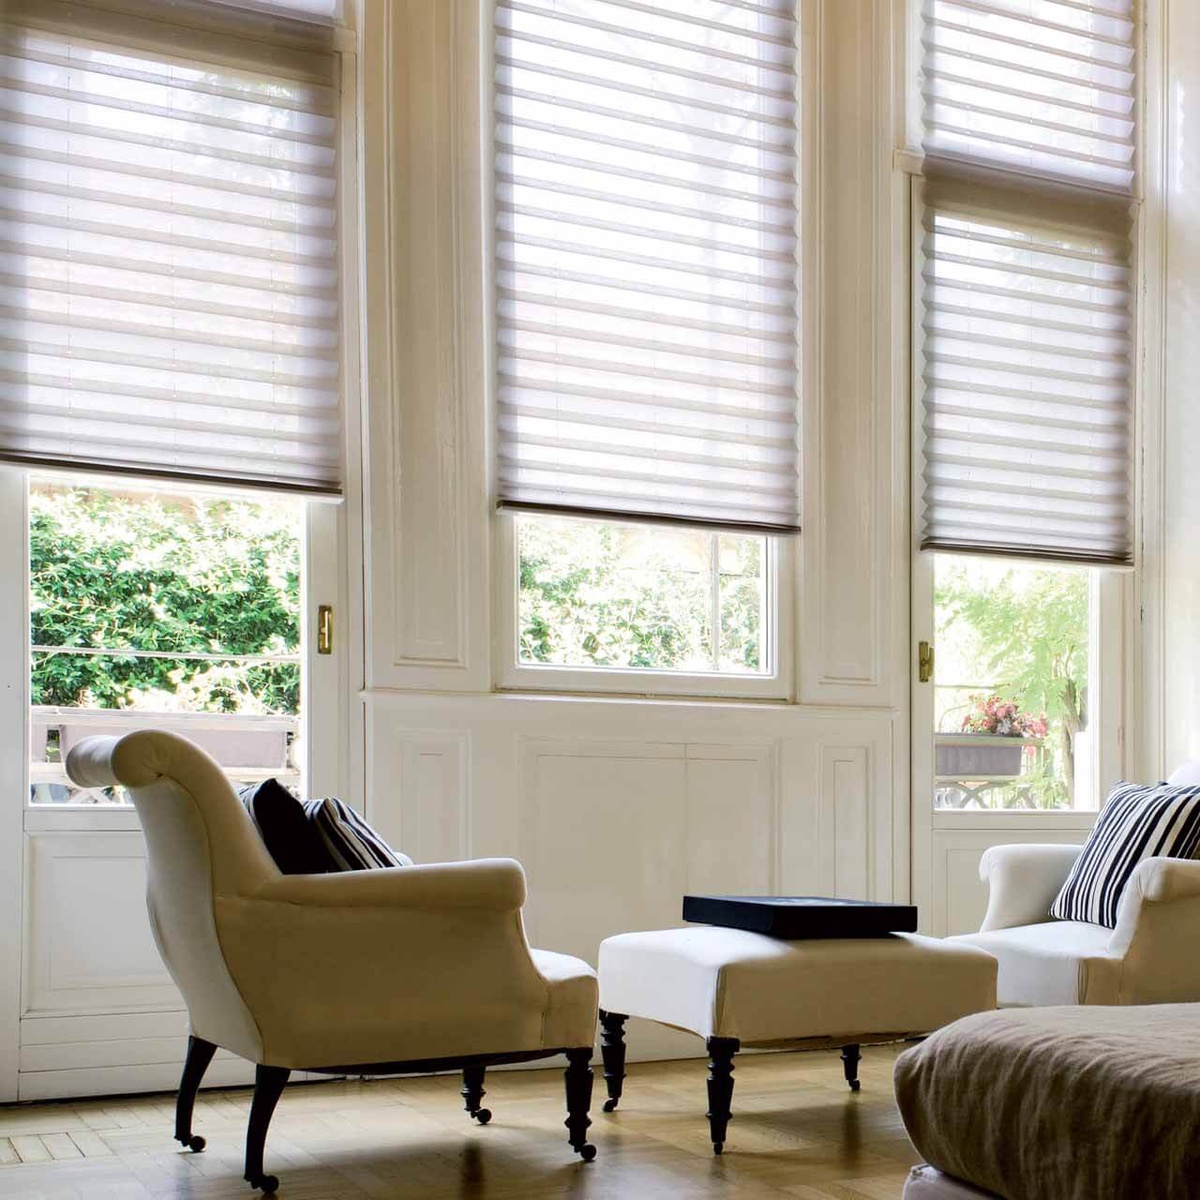 A Blinds by Design: double pleated blinds that are both stylish and functional.